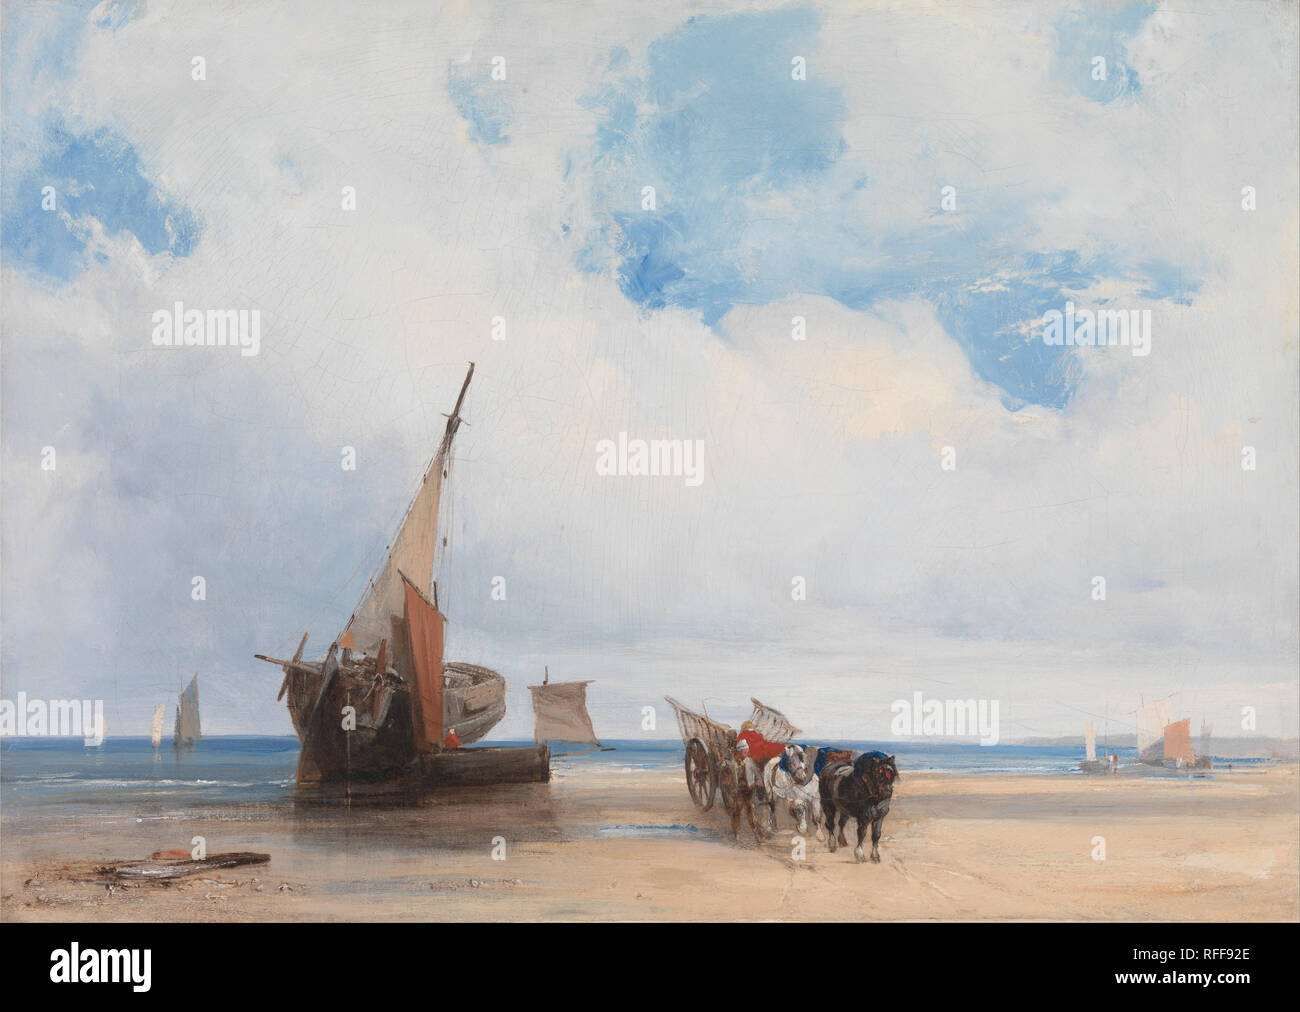 Beached Vessels and a Wagon, near Trouville, France. Date/Period: Ca. 1825. Painting. Oil on canvas. Height: 518 mm (20.39 in); Width: 670 mm (26.37 in). Author: Richard Parkes Bonington. Stock Photo